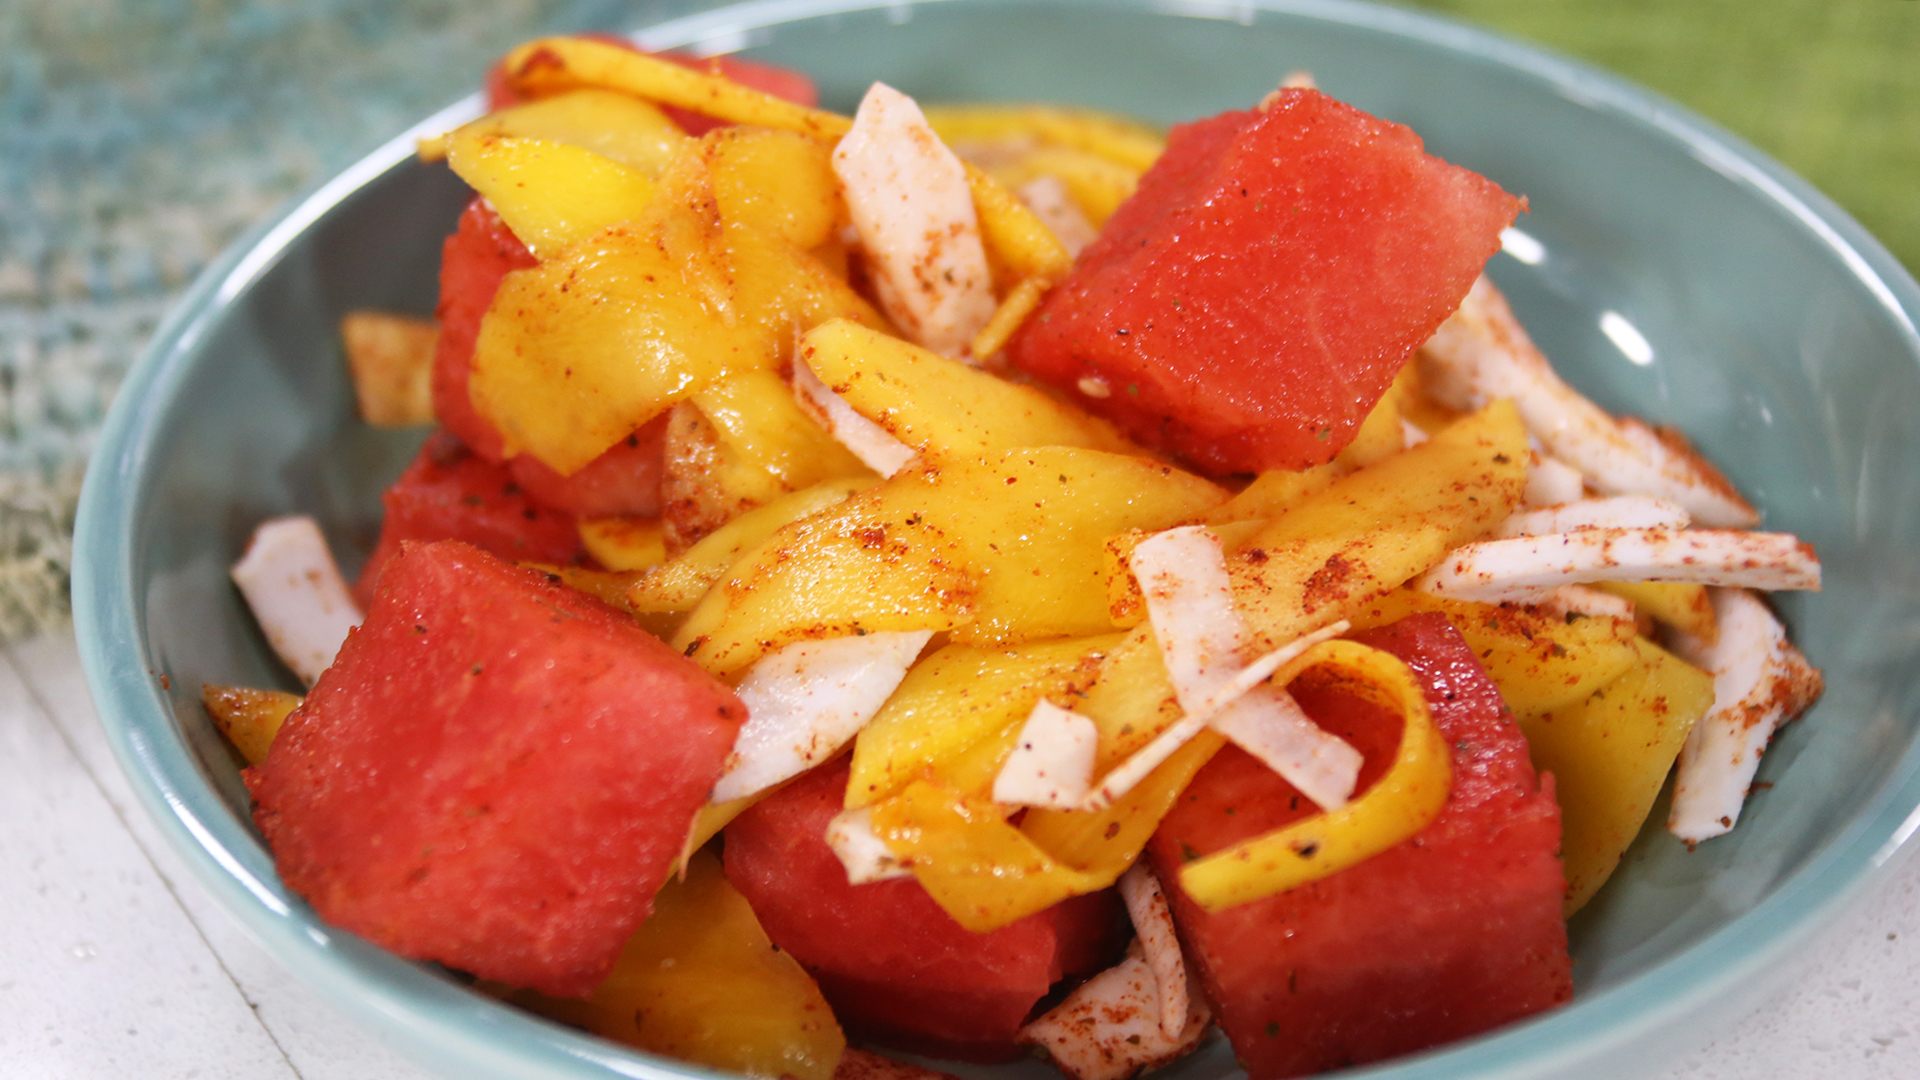 Mexican watermelon, mango, and coconut fruit salad